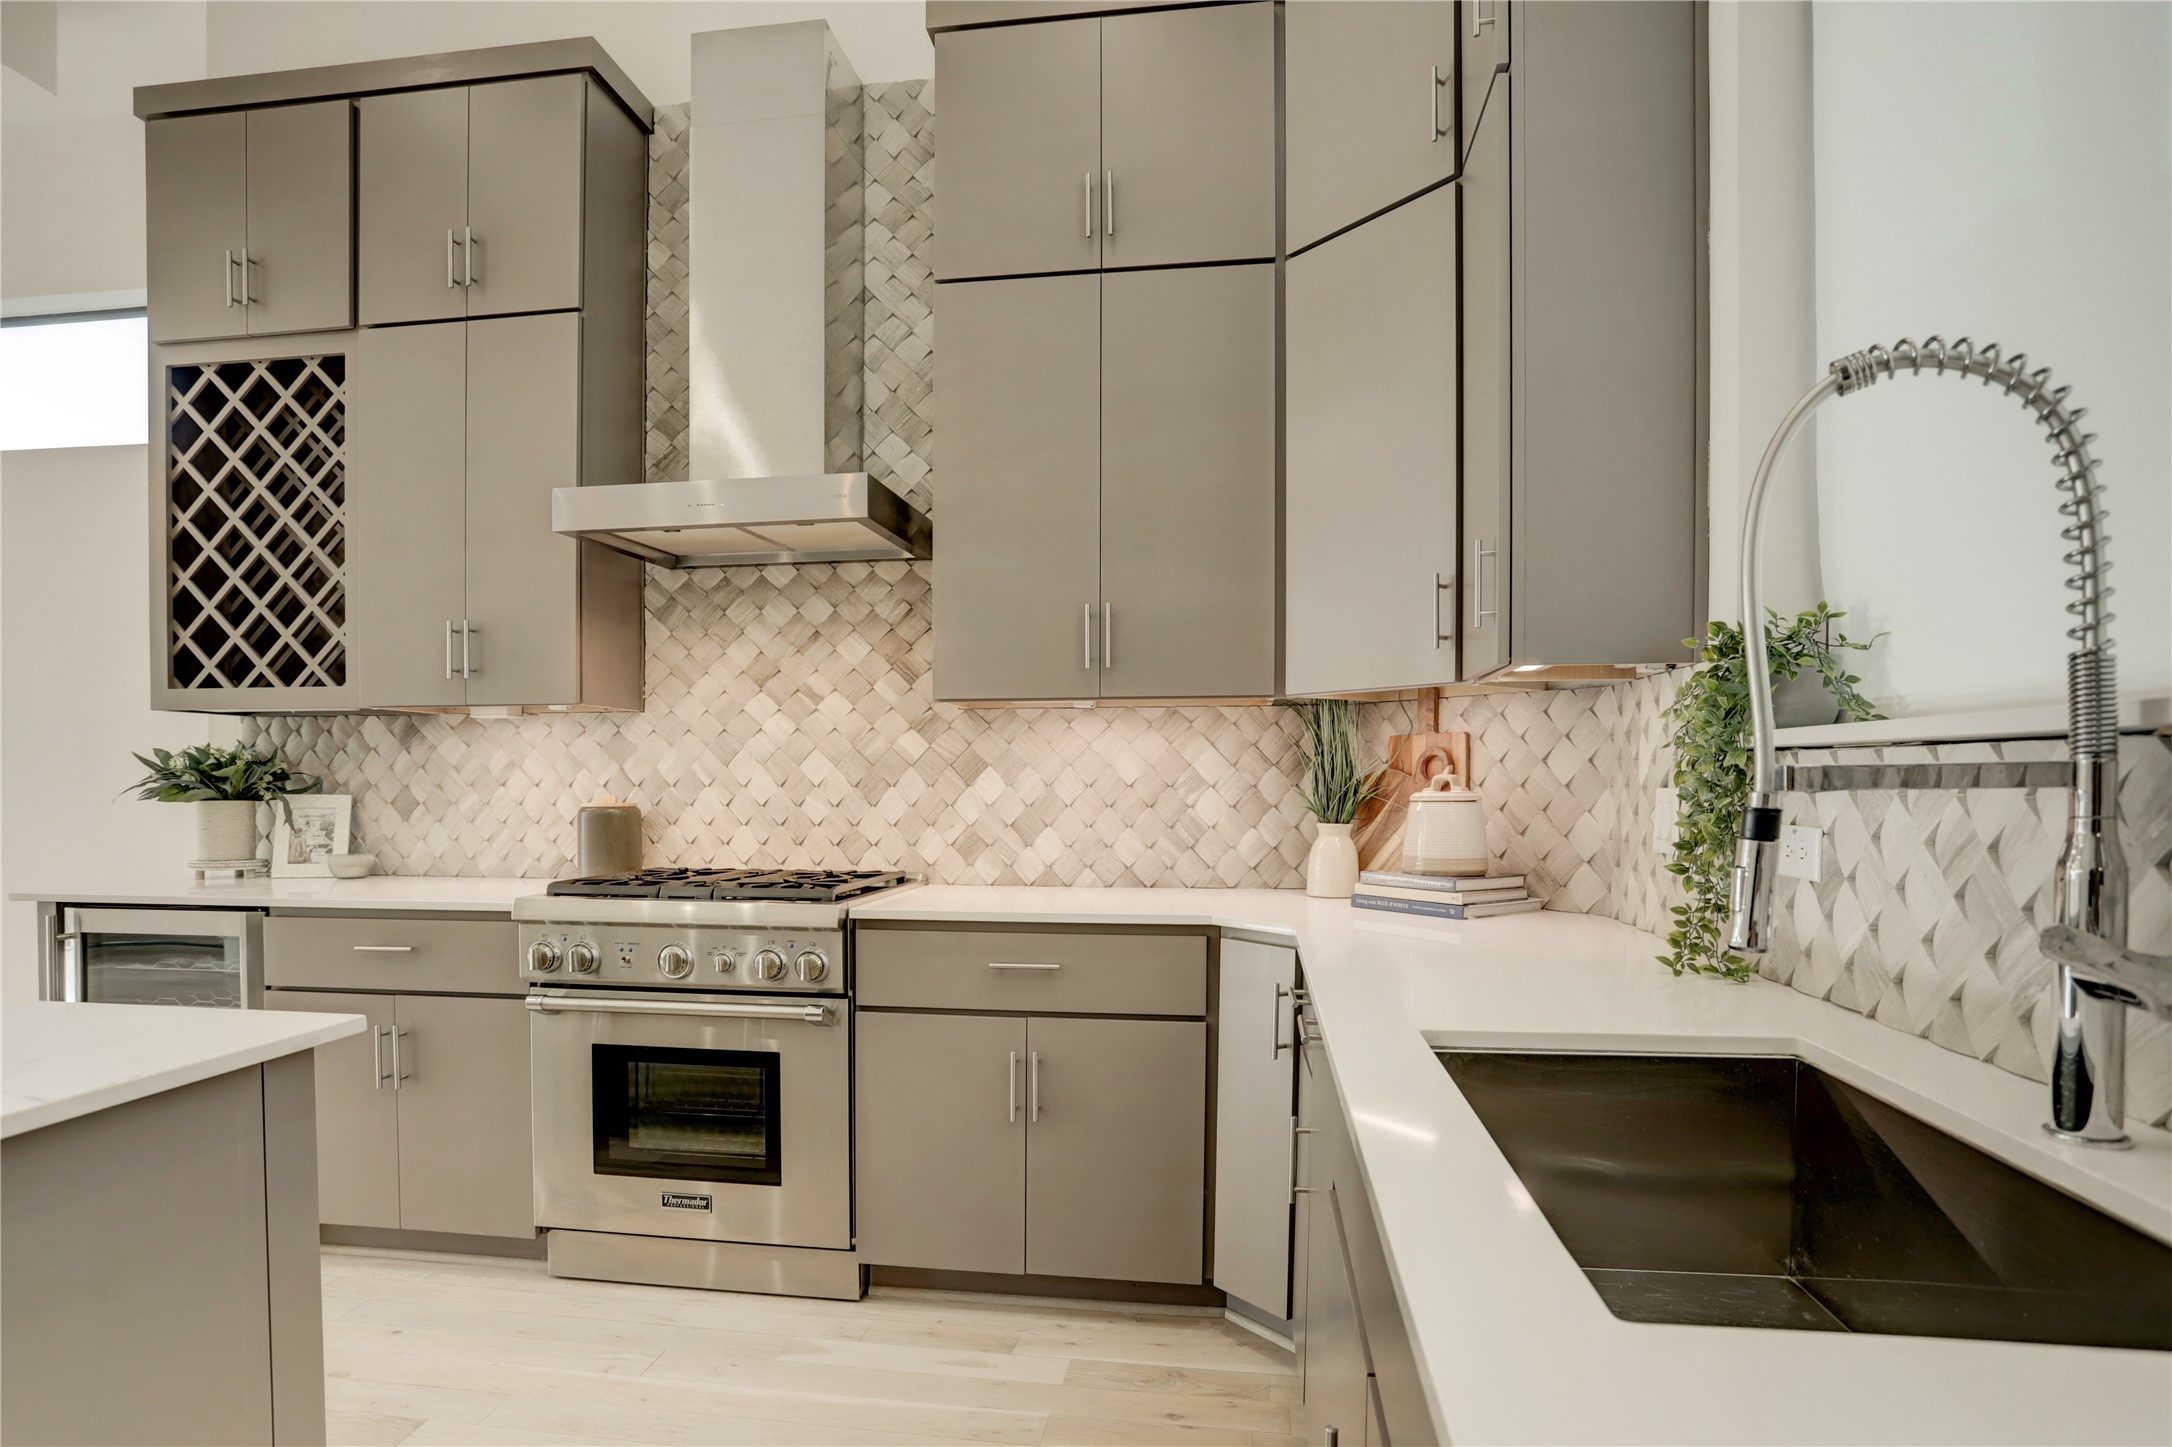 Crafted with precision and attention to detail, the custom cabinetry offers both ample storage and a touch of elegance and is highlighted by the sophisticated backsplash which adds the perfect touch of interest to the space.

